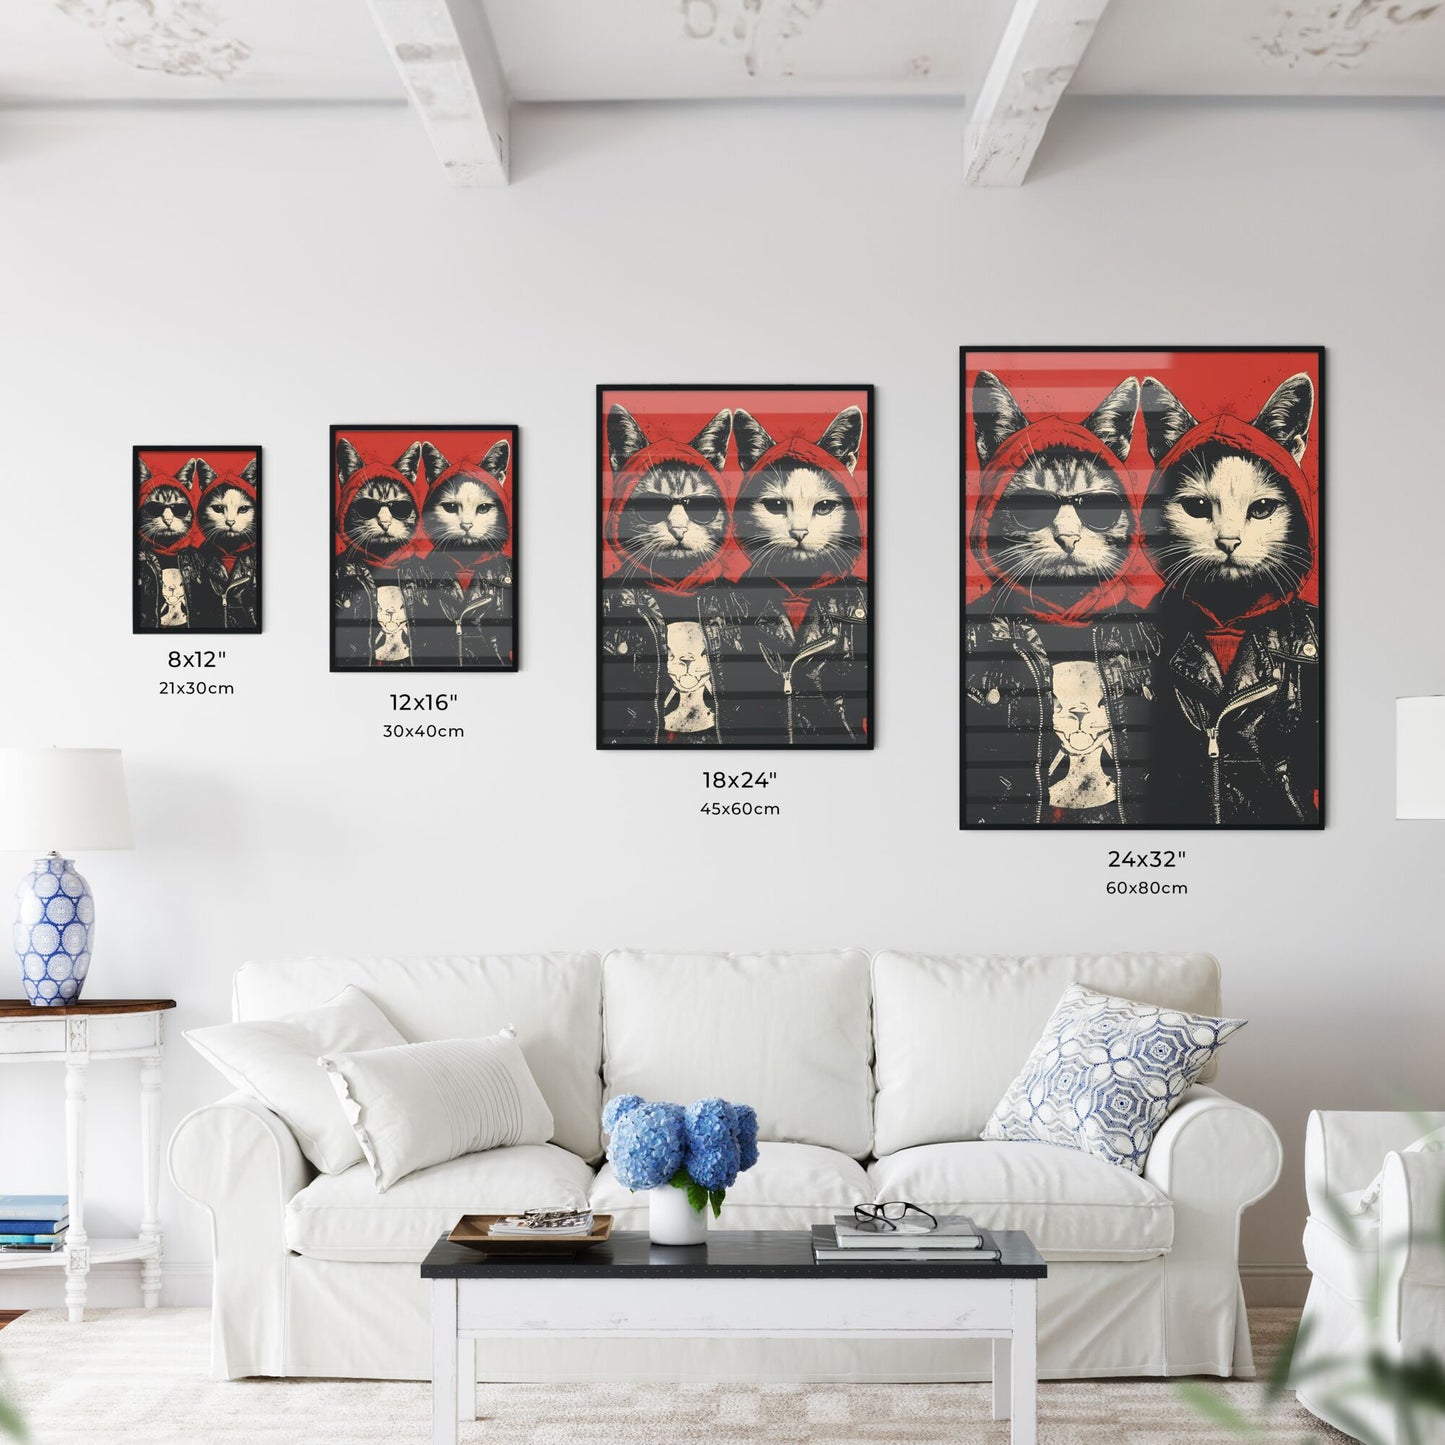 Kids wearing Halloween costumes - Art print of a couple of cats wearing hoodies and sunglasses Default Title